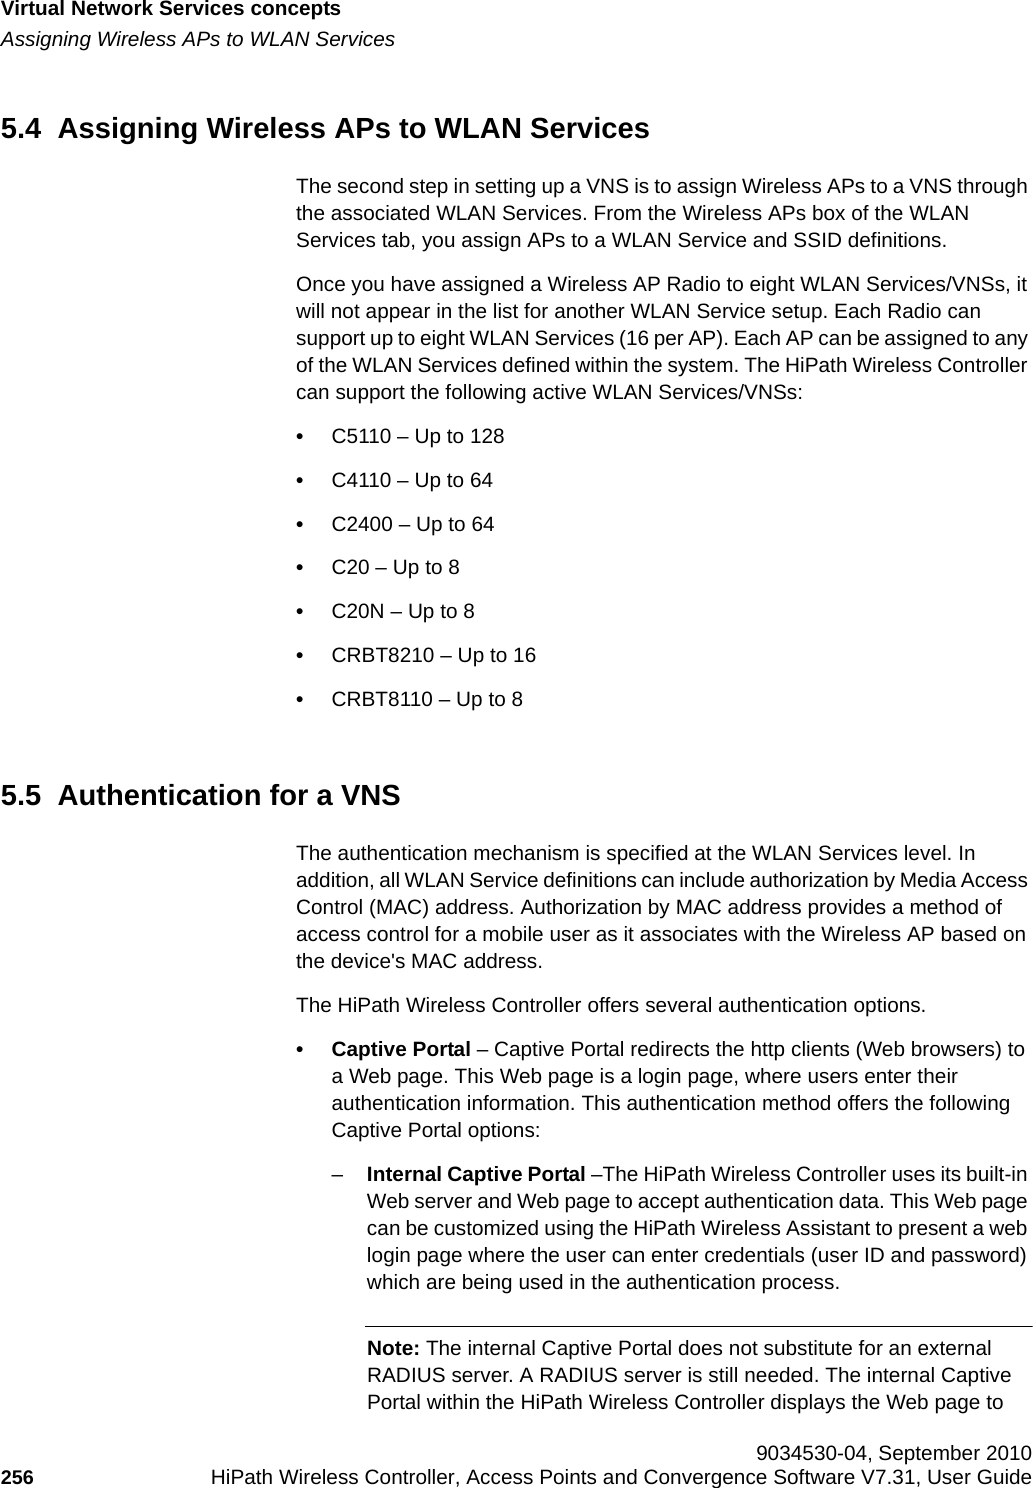 Virtual Network Services conceptshwc_vnsintro.fmAssigning Wireless APs to WLAN Services 9034530-04, September 2010256 HiPath Wireless Controller, Access Points and Convergence Software V7.31, User Guide        5.4  Assigning Wireless APs to WLAN ServicesThe second step in setting up a VNS is to assign Wireless APs to a VNS through the associated WLAN Services. From the Wireless APs box of the WLAN Services tab, you assign APs to a WLAN Service and SSID definitions. Once you have assigned a Wireless AP Radio to eight WLAN Services/VNSs, it will not appear in the list for another WLAN Service setup. Each Radio can support up to eight WLAN Services (16 per AP). Each AP can be assigned to any of the WLAN Services defined within the system. The HiPath Wireless Controller can support the following active WLAN Services/VNSs:•C5110 – Up to 128•C4110 – Up to 64 •C2400 – Up to 64 •C20 – Up to 8 •C20N – Up to 8 •CRBT8210 – Up to 16•CRBT8110 – Up to 8 5.5  Authentication for a VNSThe authentication mechanism is specified at the WLAN Services level. In addition, all WLAN Service definitions can include authorization by Media Access Control (MAC) address. Authorization by MAC address provides a method of access control for a mobile user as it associates with the Wireless AP based on the device&apos;s MAC address.The HiPath Wireless Controller offers several authentication options. • Captive Portal – Captive Portal redirects the http clients (Web browsers) to a Web page. This Web page is a login page, where users enter their authentication information. This authentication method offers the following Captive Portal options:–Internal Captive Portal –The HiPath Wireless Controller uses its built-in Web server and Web page to accept authentication data. This Web page can be customized using the HiPath Wireless Assistant to present a web login page where the user can enter credentials (user ID and password) which are being used in the authentication process.Note: The internal Captive Portal does not substitute for an external RADIUS server. A RADIUS server is still needed. The internal Captive Portal within the HiPath Wireless Controller displays the Web page to 